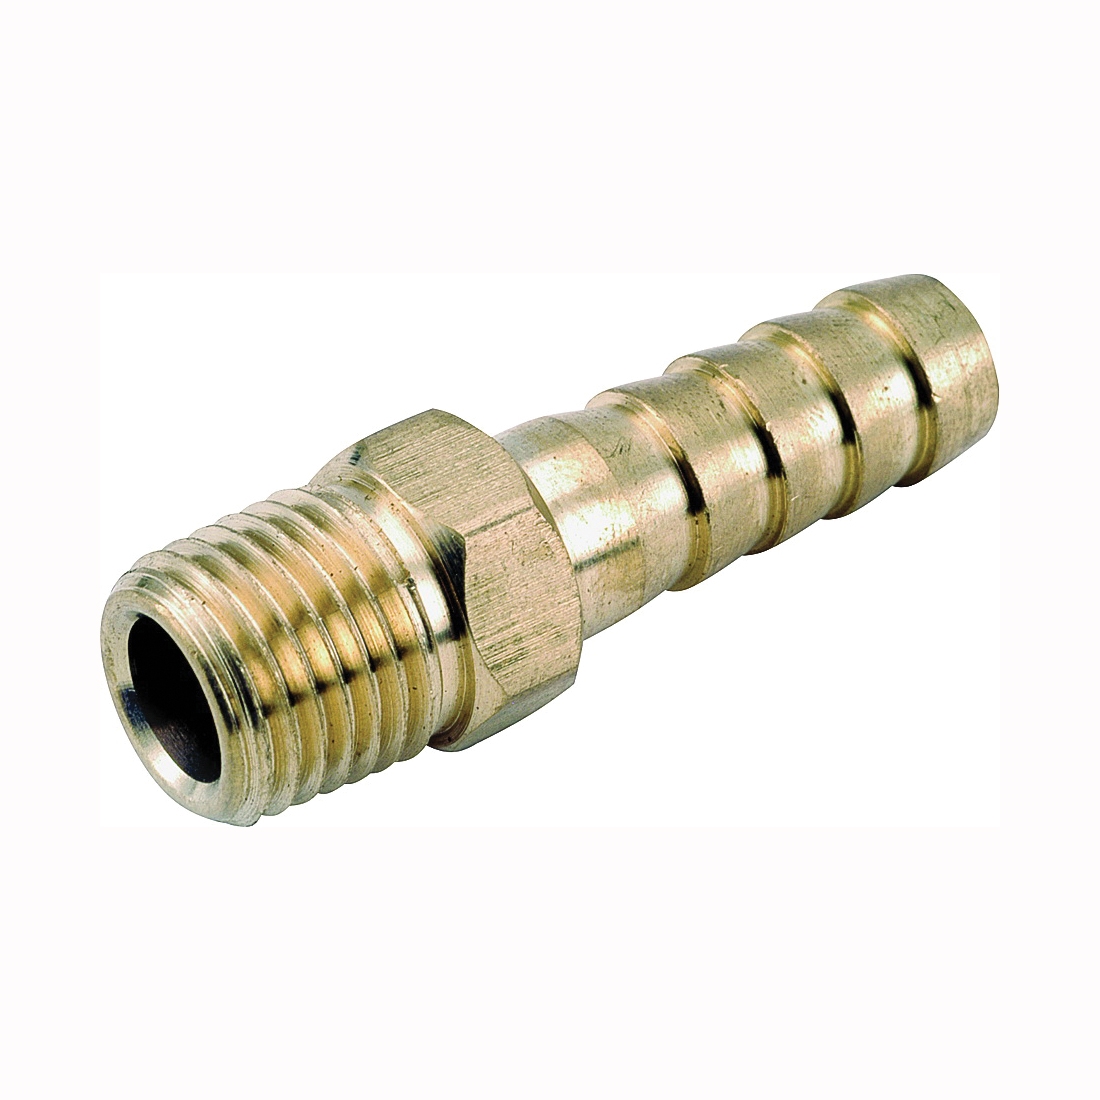 Anderson Metals 757001-0202 Hose Adapter, 1/8 in, Barb x MPT, Brass - 1